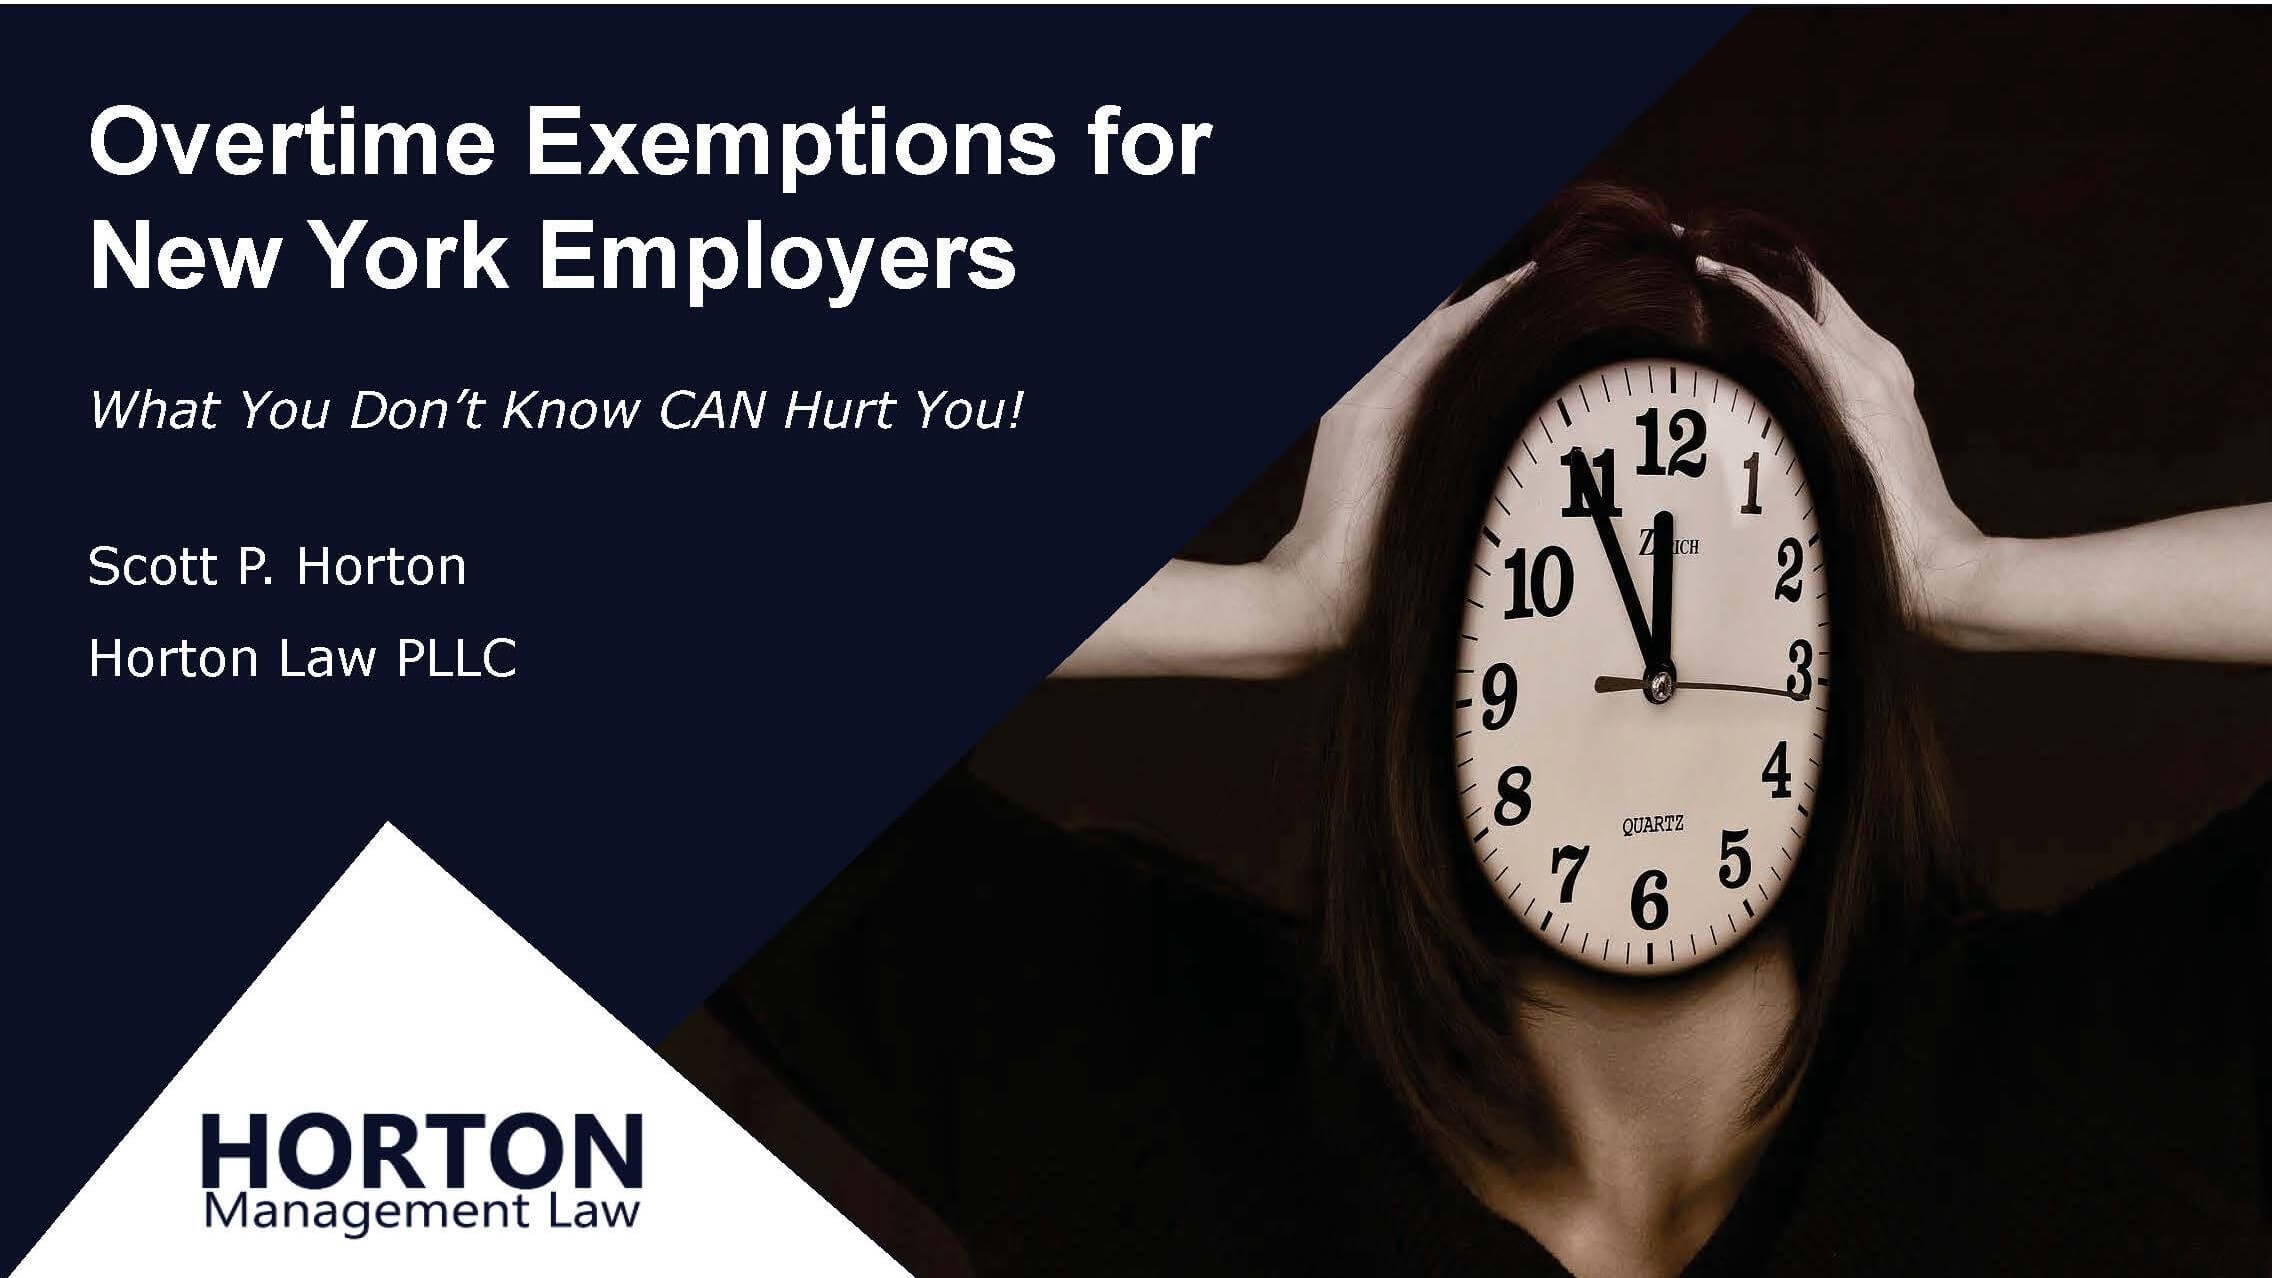 Overtime Exemptions for New York Employers